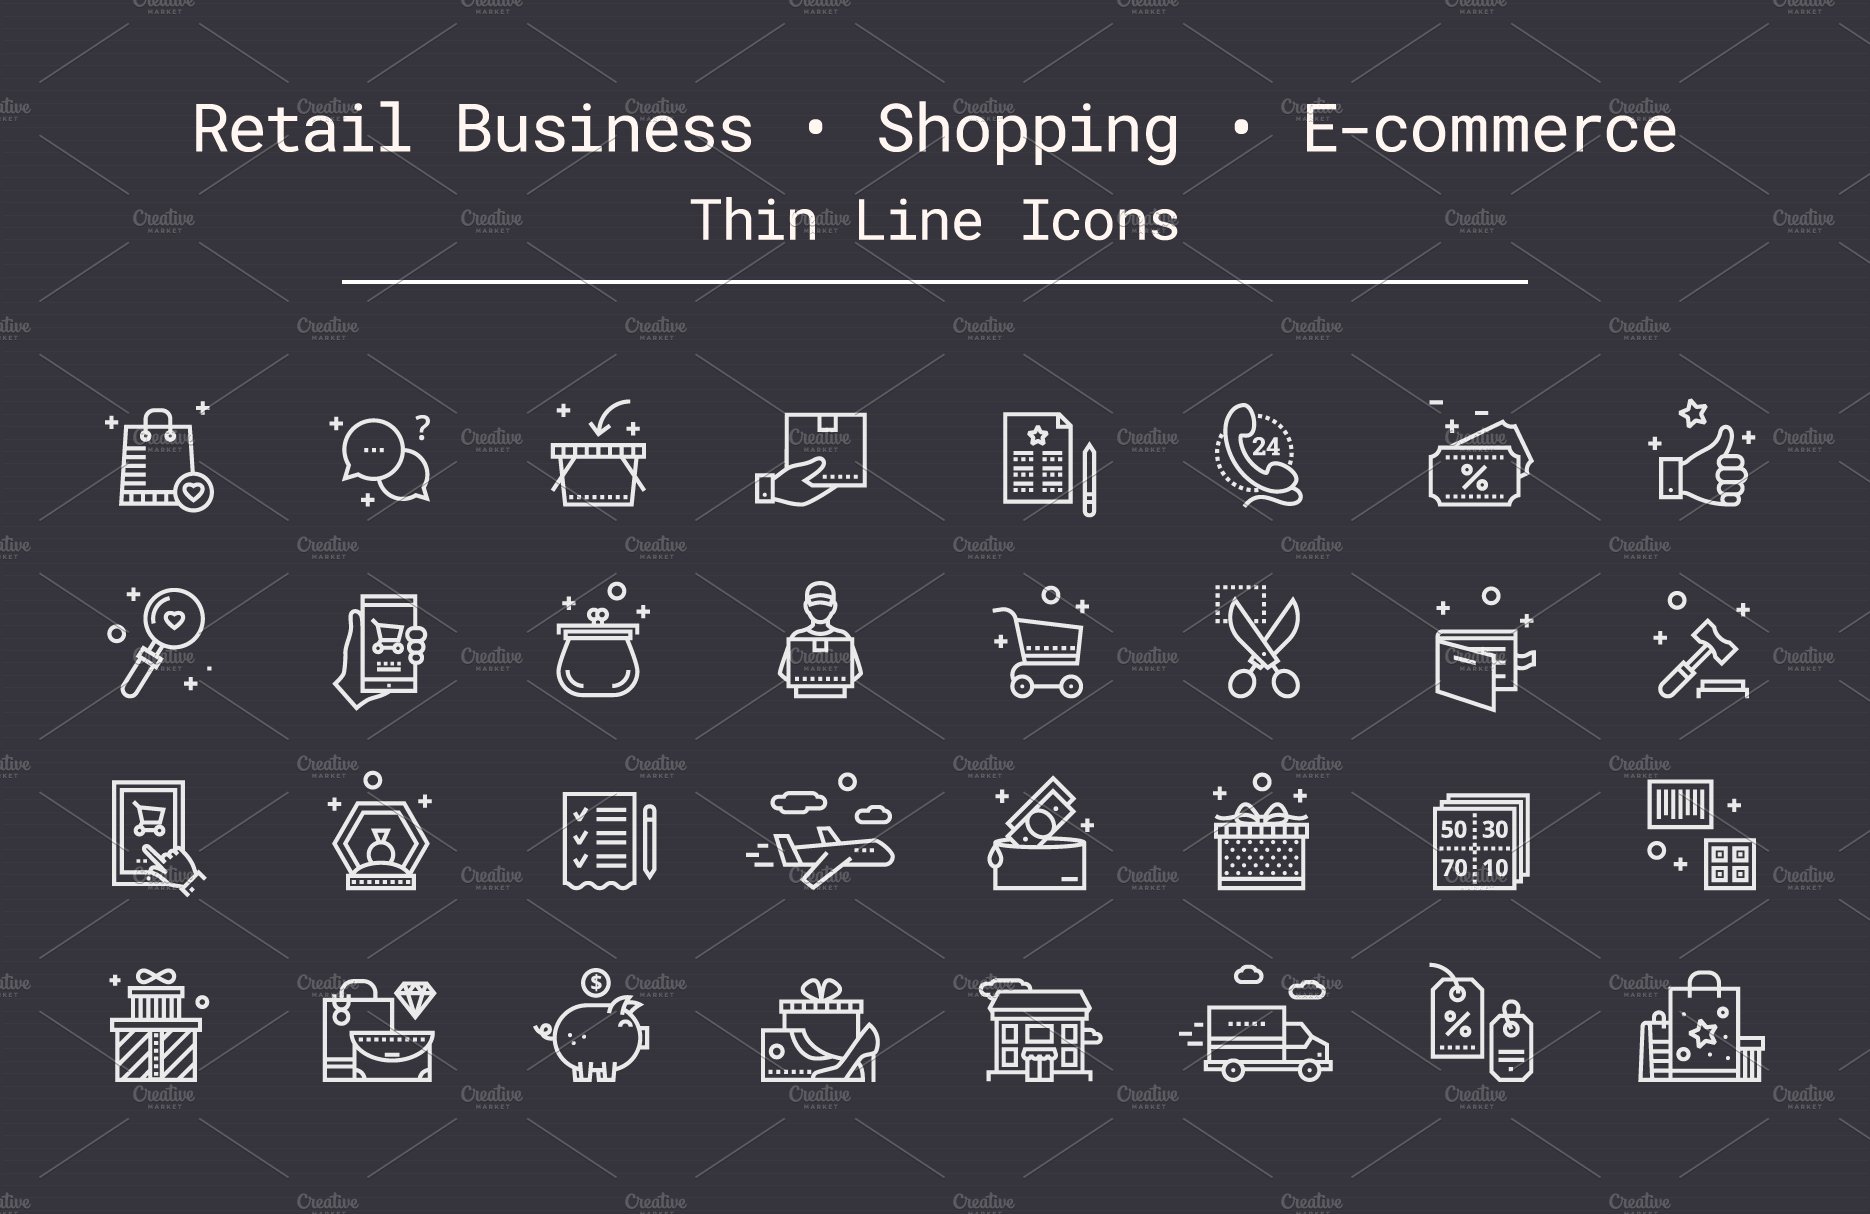 Shopping, E-commerce Thin Line Icons cover image.